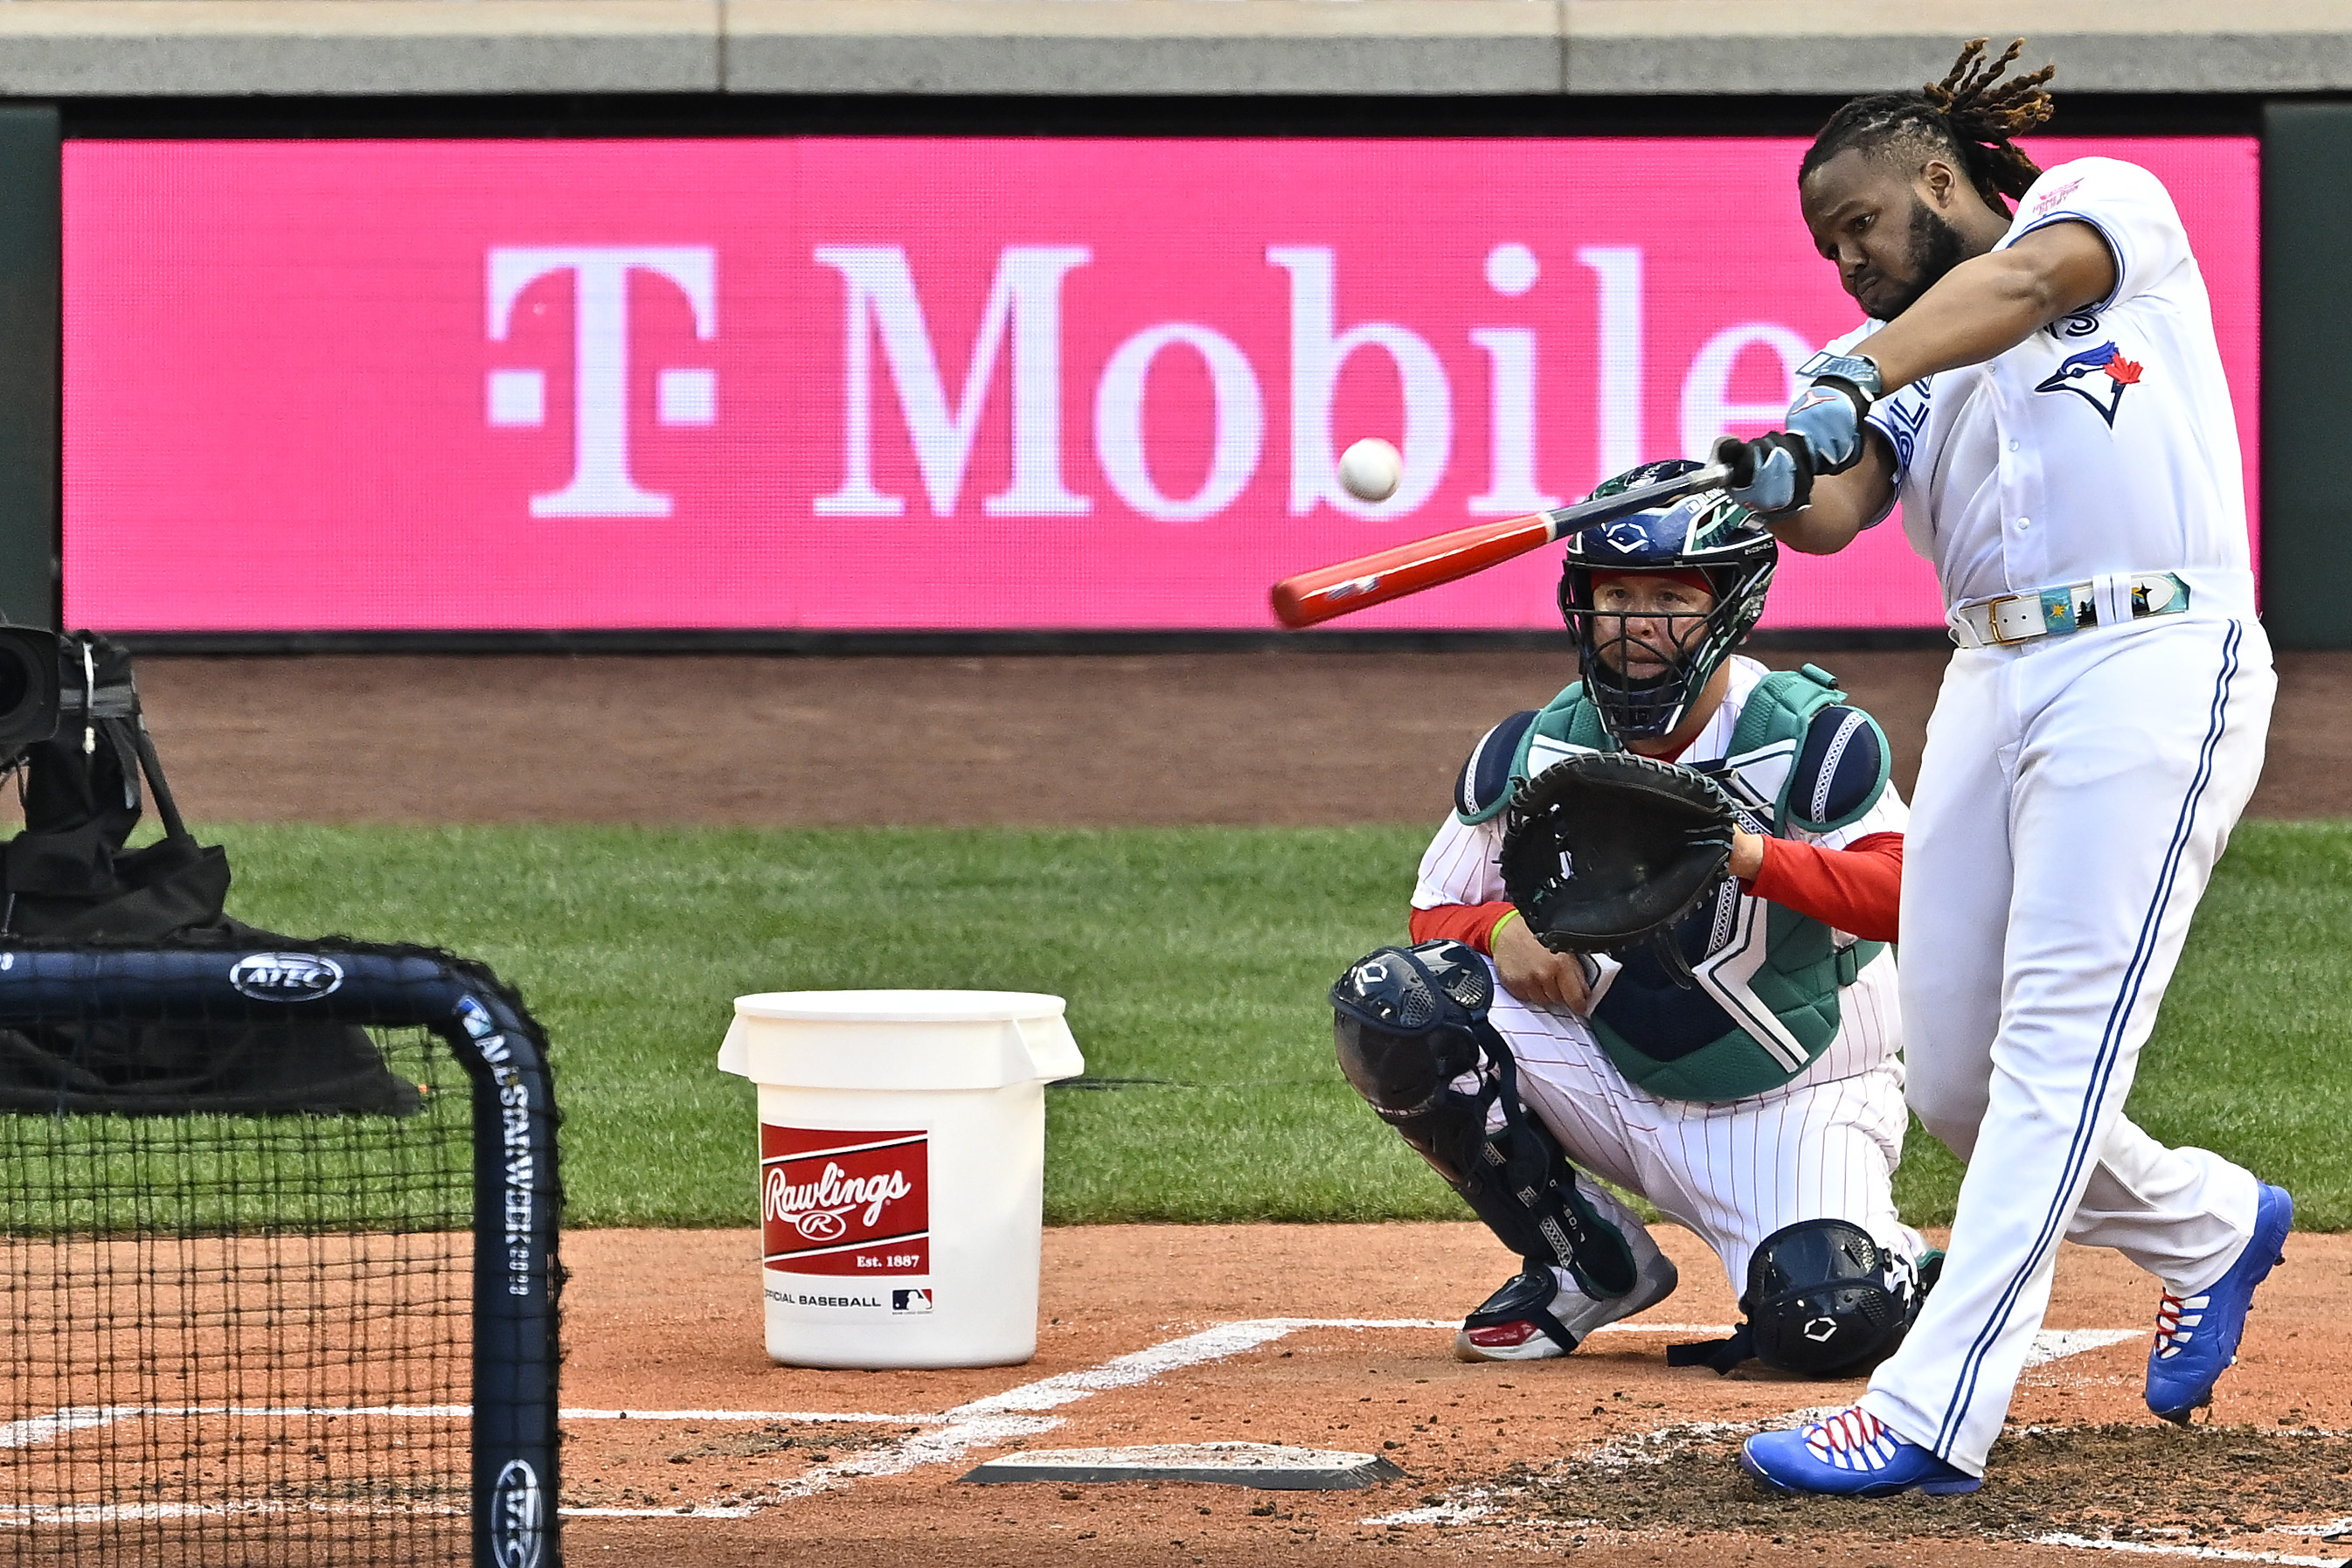 Vladimir Guerrero Jr. of the Toronto Blue Jays bats during the T-Mobile Home Run Derby at T-Mobile Park on July 10, 2023 in Seattle, Washington.